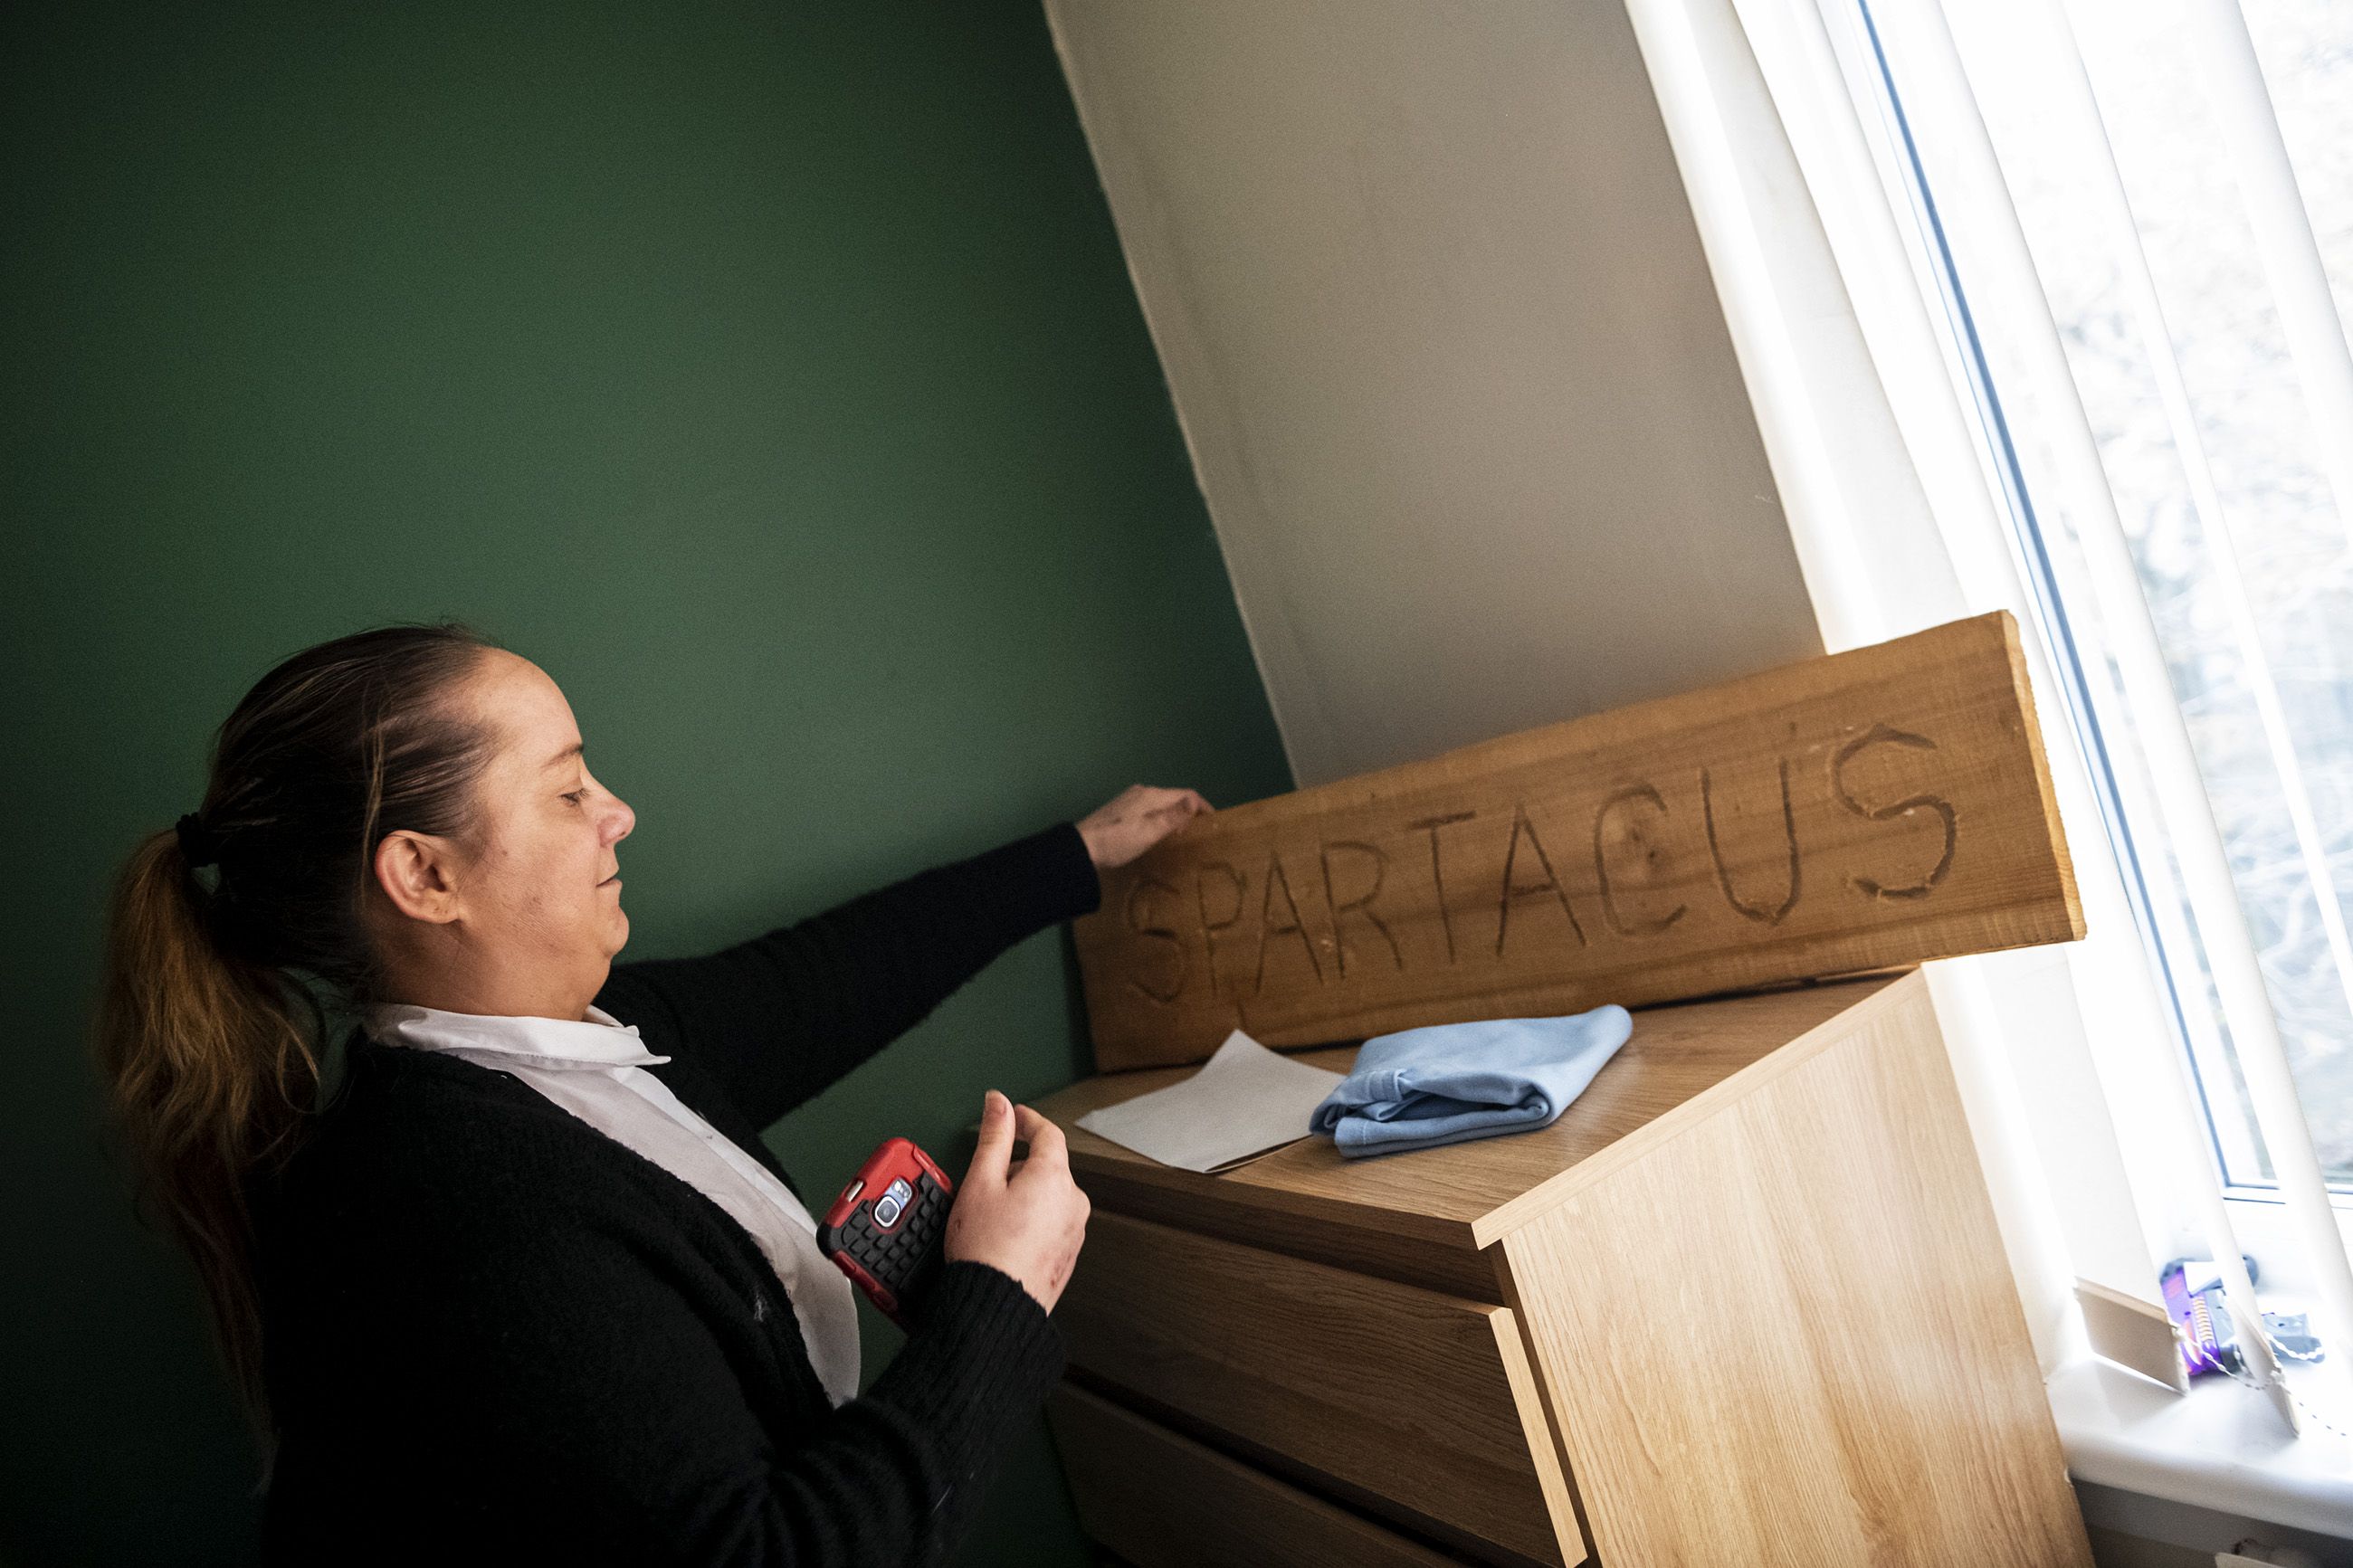 Natalie Muir fixes a wooden name plate with her son's name on it that she intends to hang on the wall of his room. Image by Michael Santiago. Scotland, 2019. 